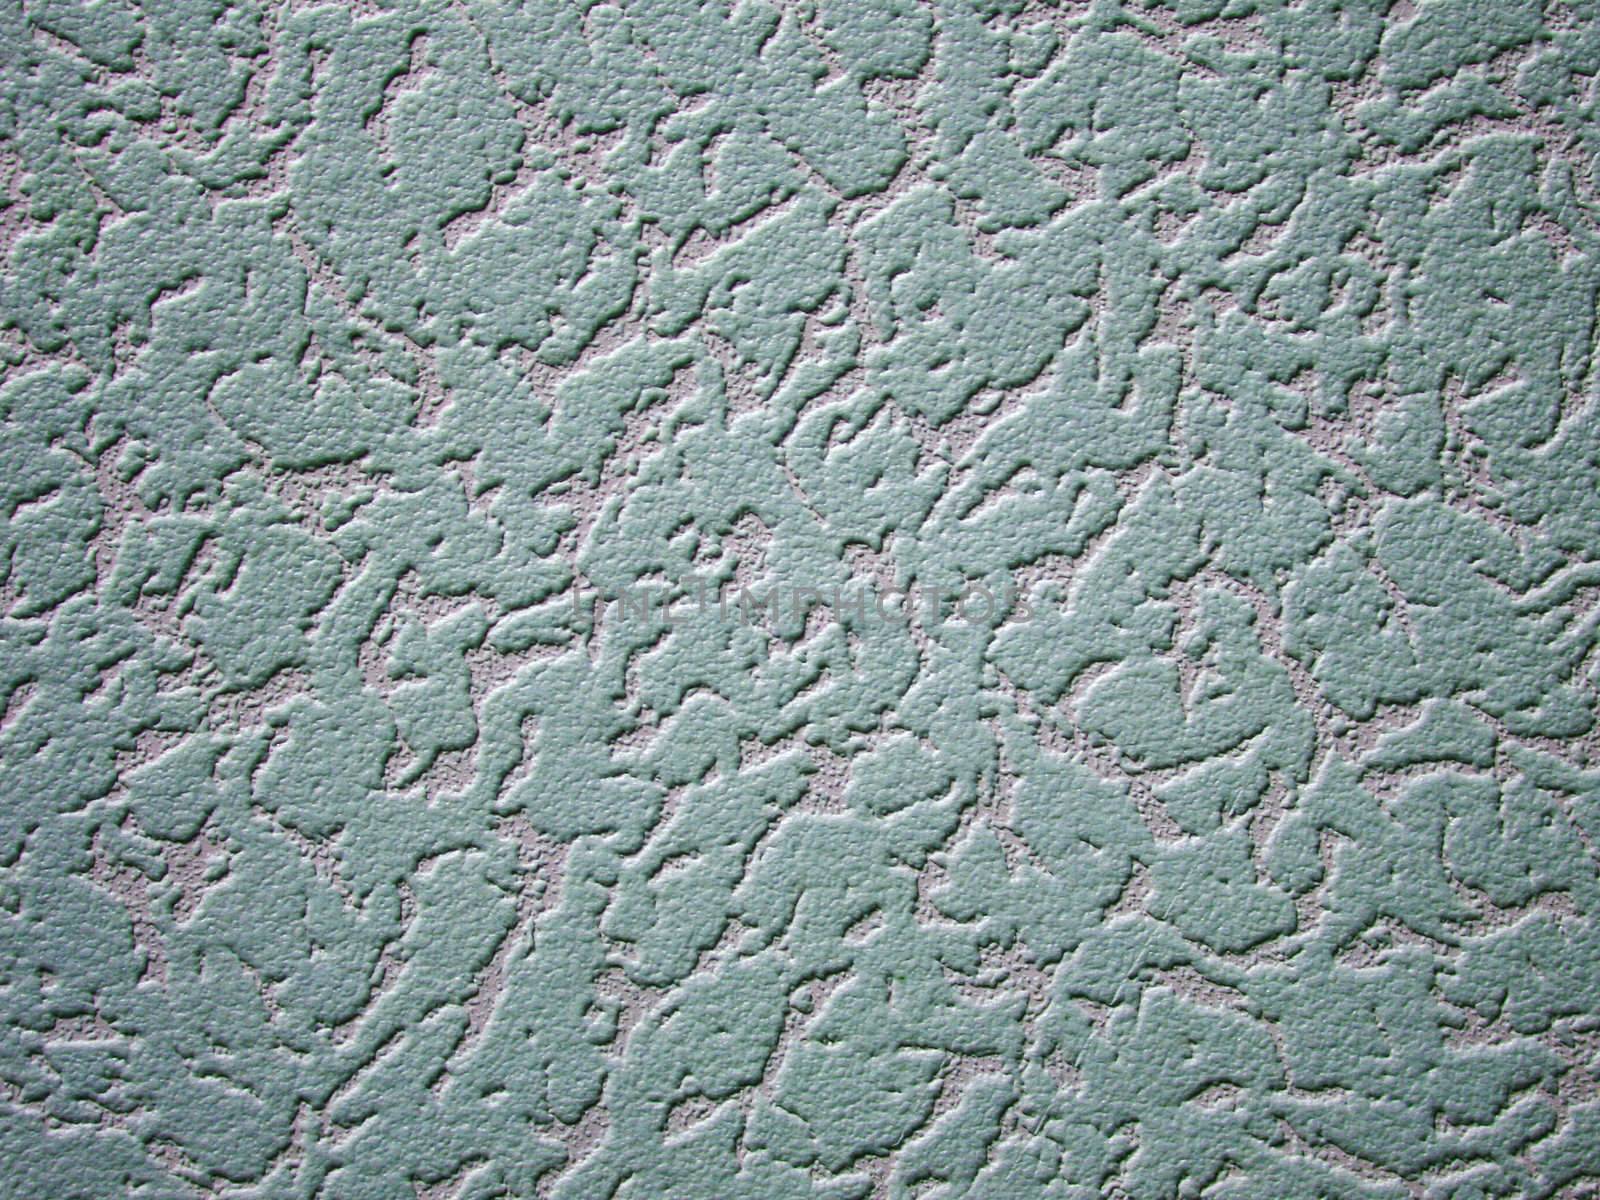 Surface of the painted wall-papers